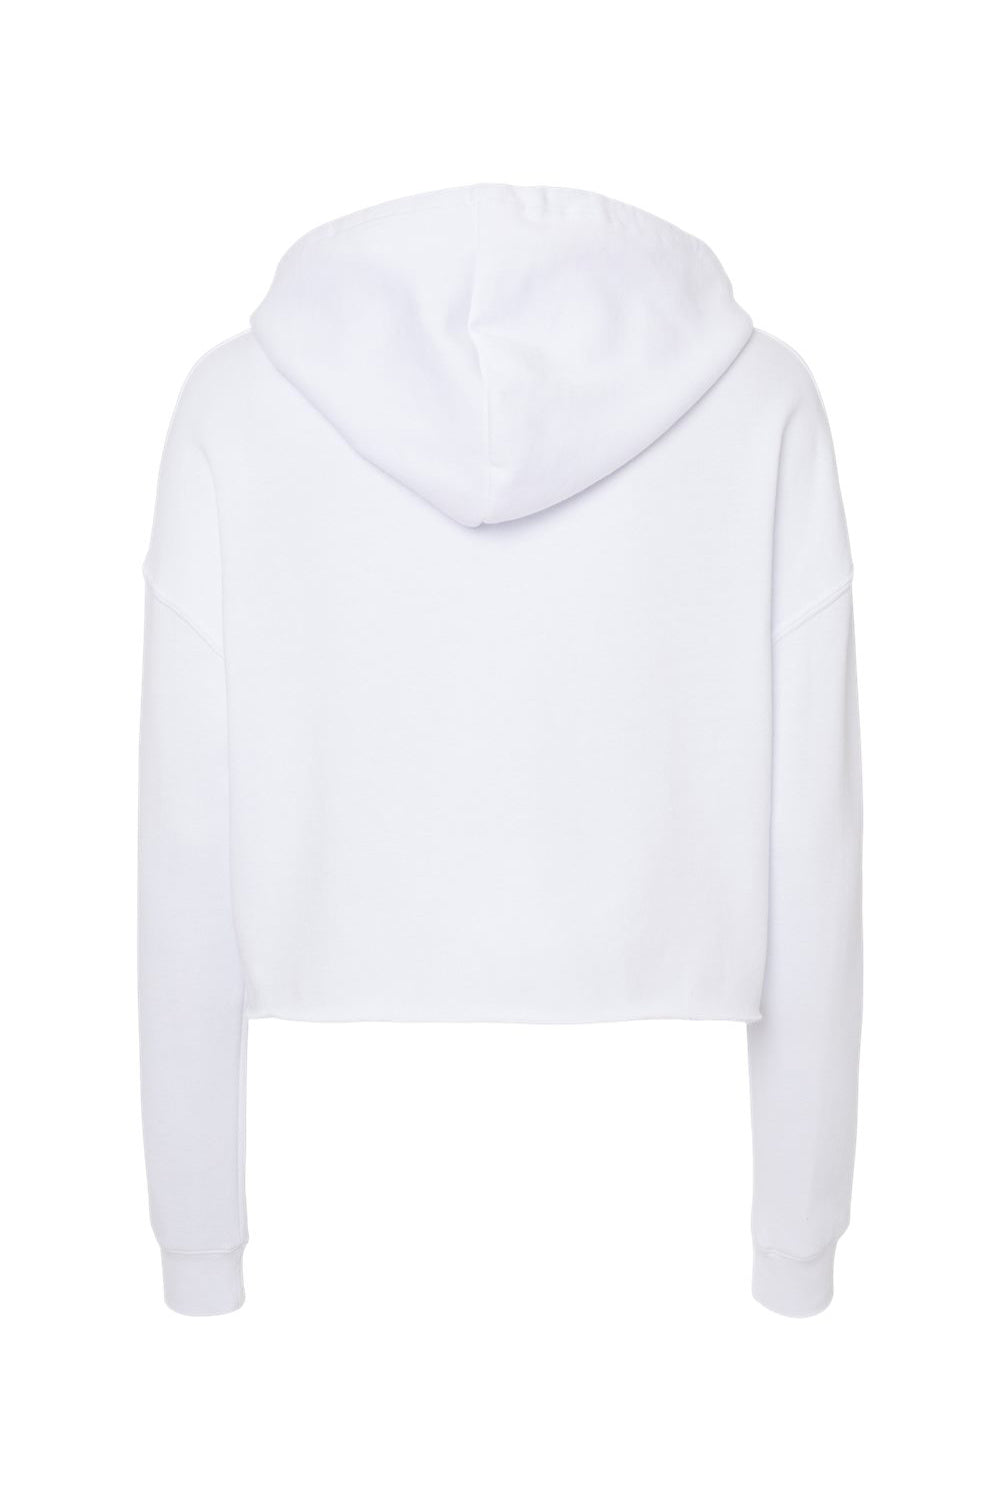 Independent Trading Co. AFX64CRP Womens Crop Hooded Sweatshirt Hoodie White Flat Back